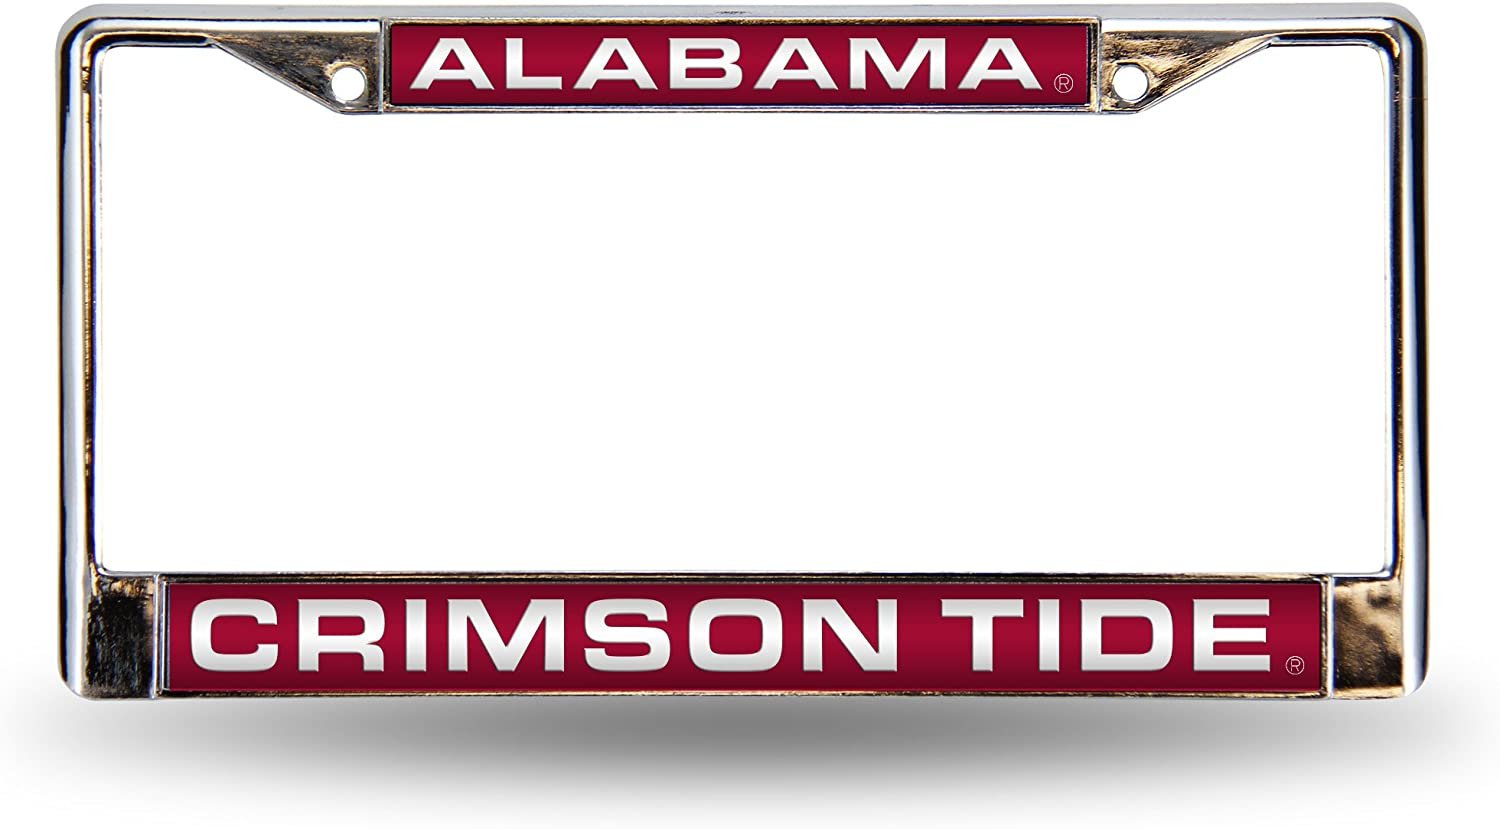 University of Alabama Crimson Tide Chrome Metal License Plate Frame Tag Cover, Laser Acrylic Mirrored Inserts, 12x6 Inch